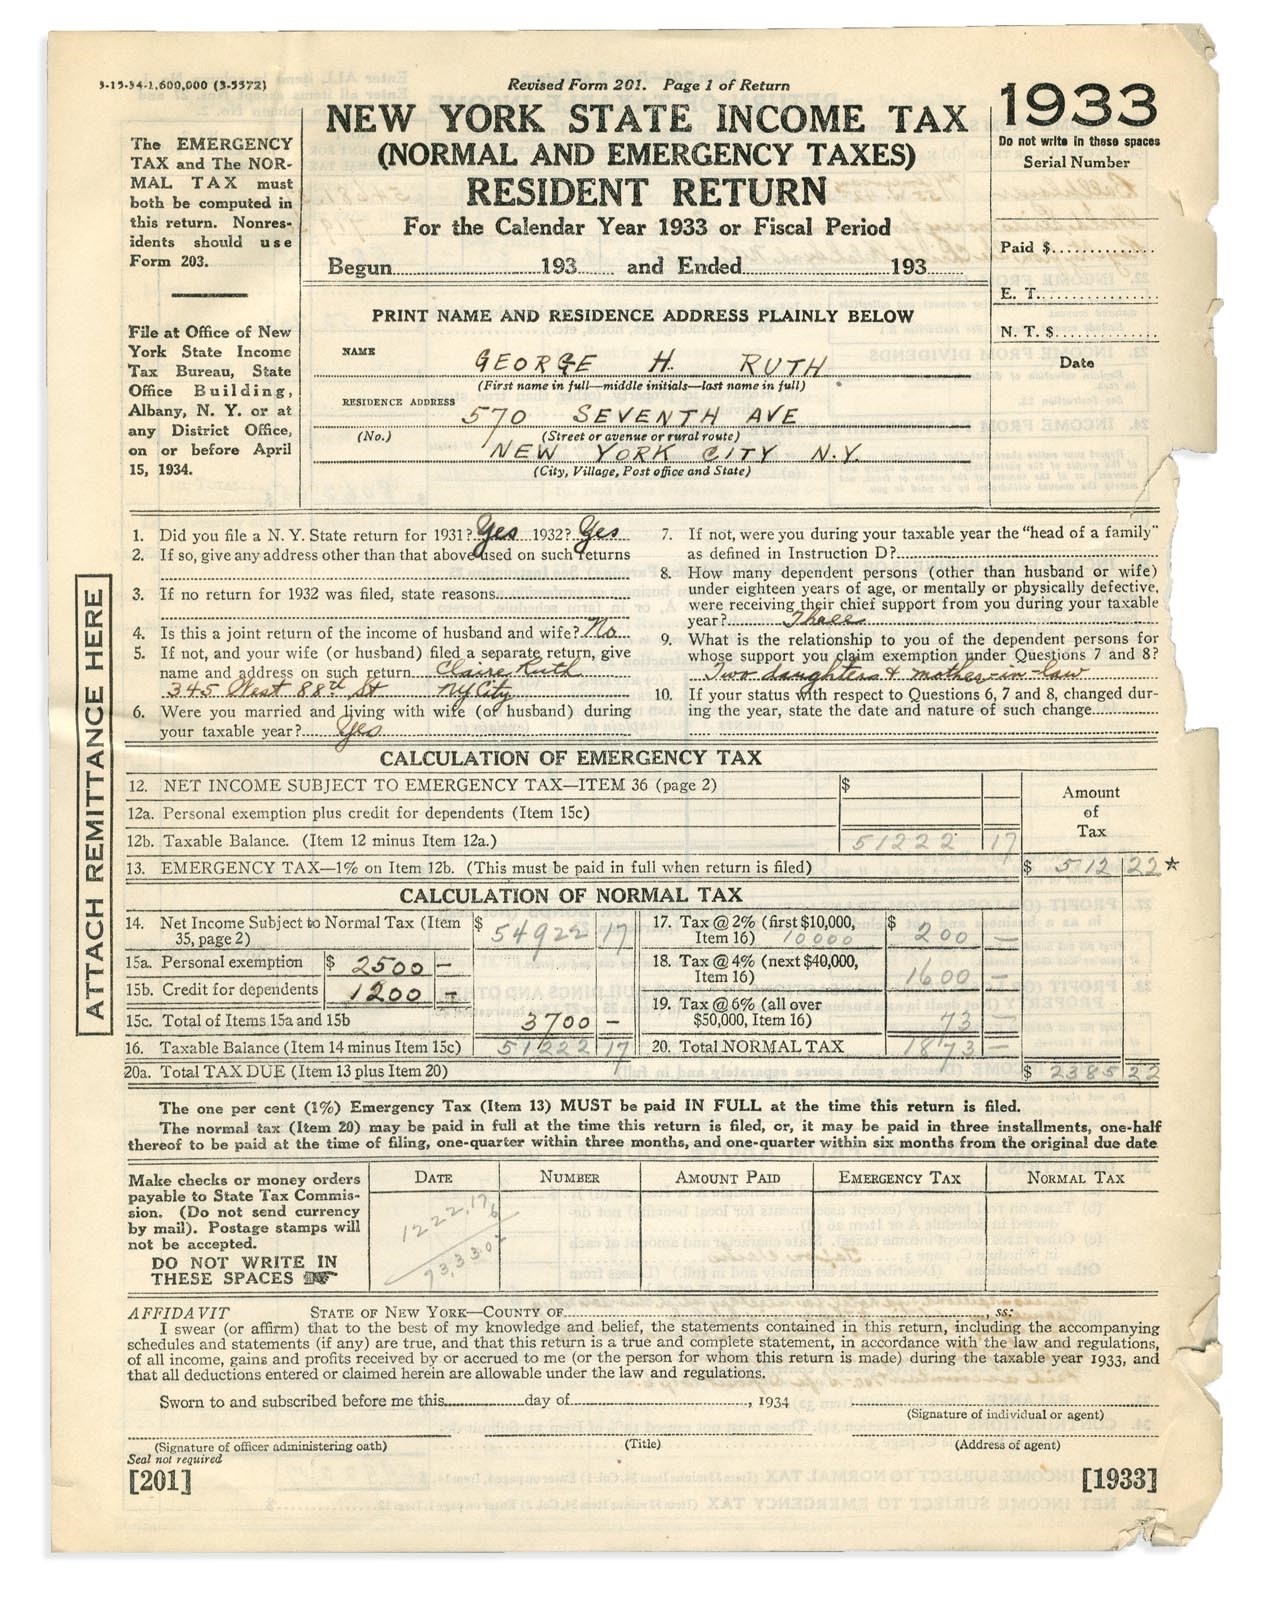 Collection Of Babe Ruth's Right Hand Man - 1933 Babe Ruth N.Y. State Income Tax Return